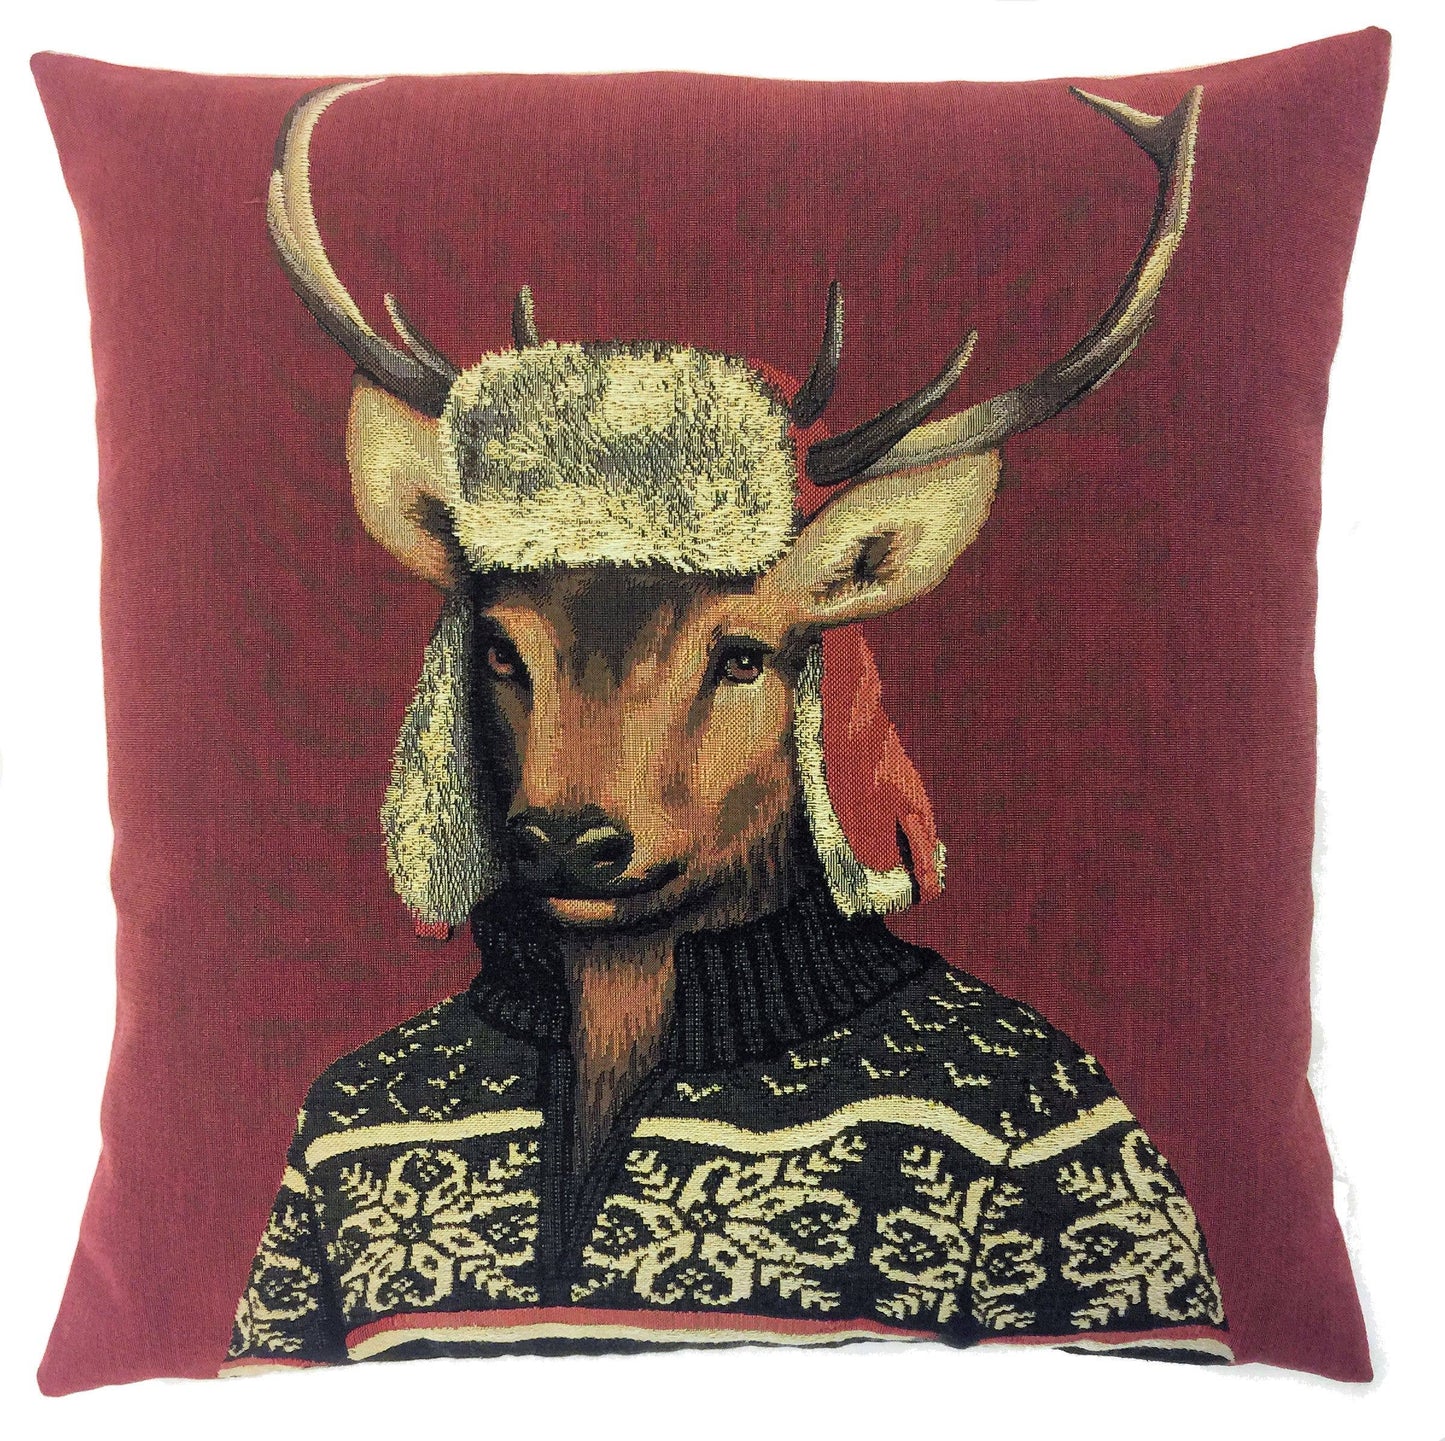 Deer Pillow Cover - Tapestry Cushion - Decorative Pillow